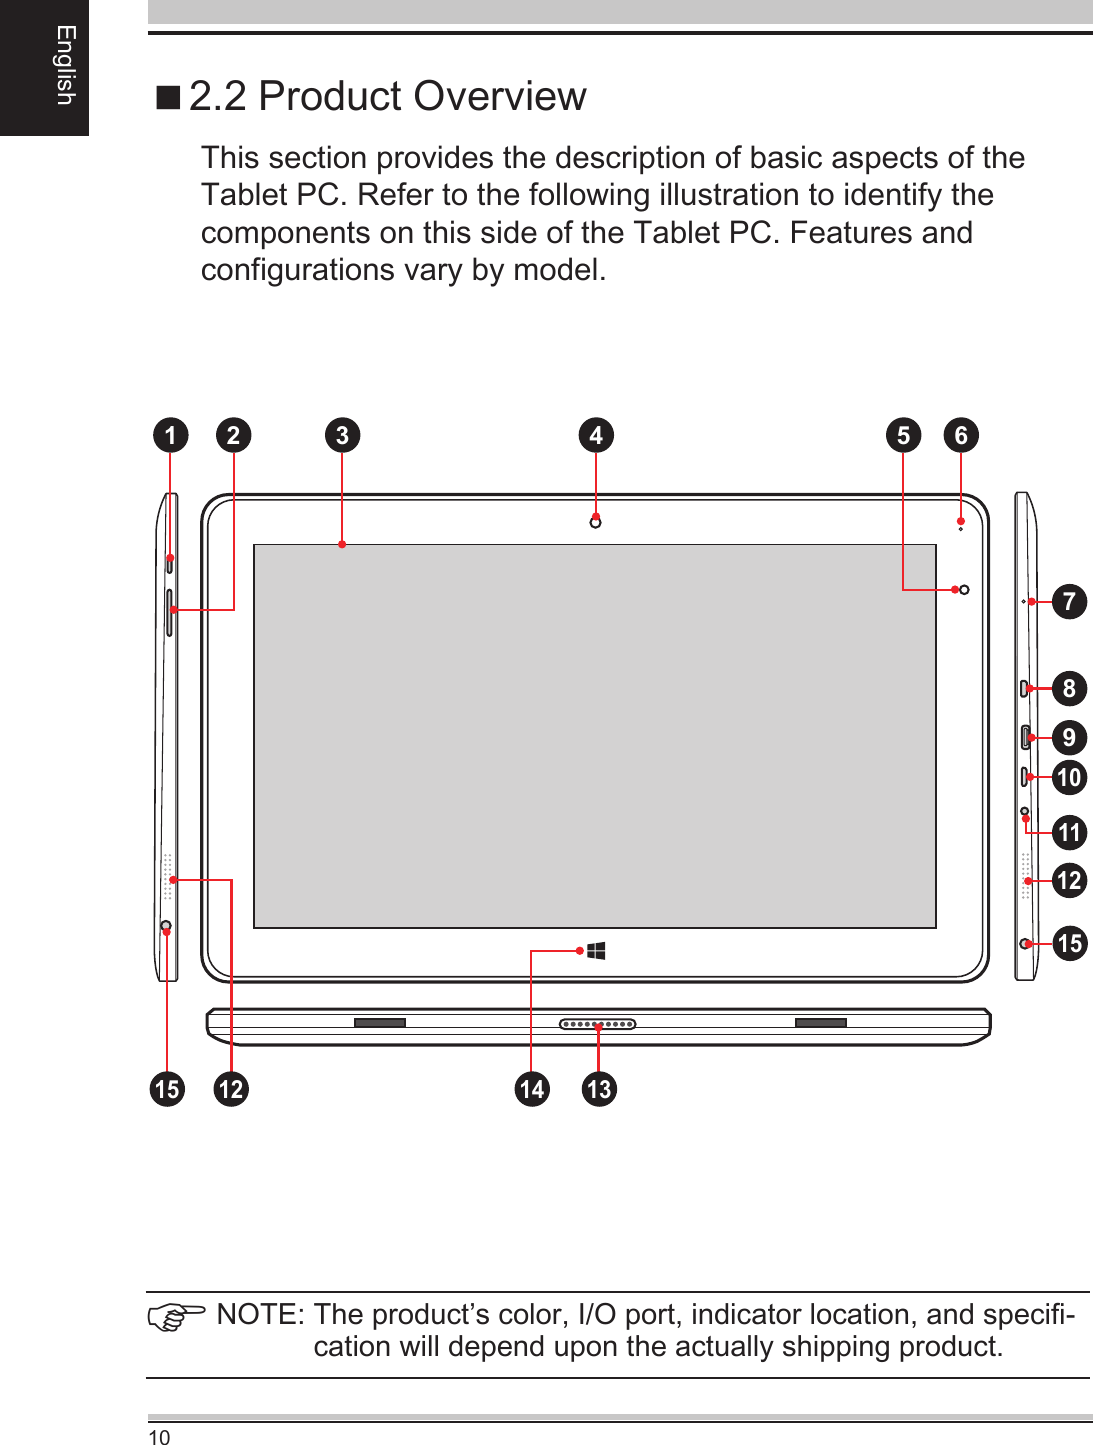 10English2.2 Product OverviewThis section provides the description of basic aspects of the Tablet PC. Refer to the following illustration to identify the components on this side of the Tablet PC. Features and congurations vary by model.NOTE:  The product’s color, I/O port, indicator location, and speci-cation will depend upon the actually shipping product.1 2 3 4 5 67891011121314121515